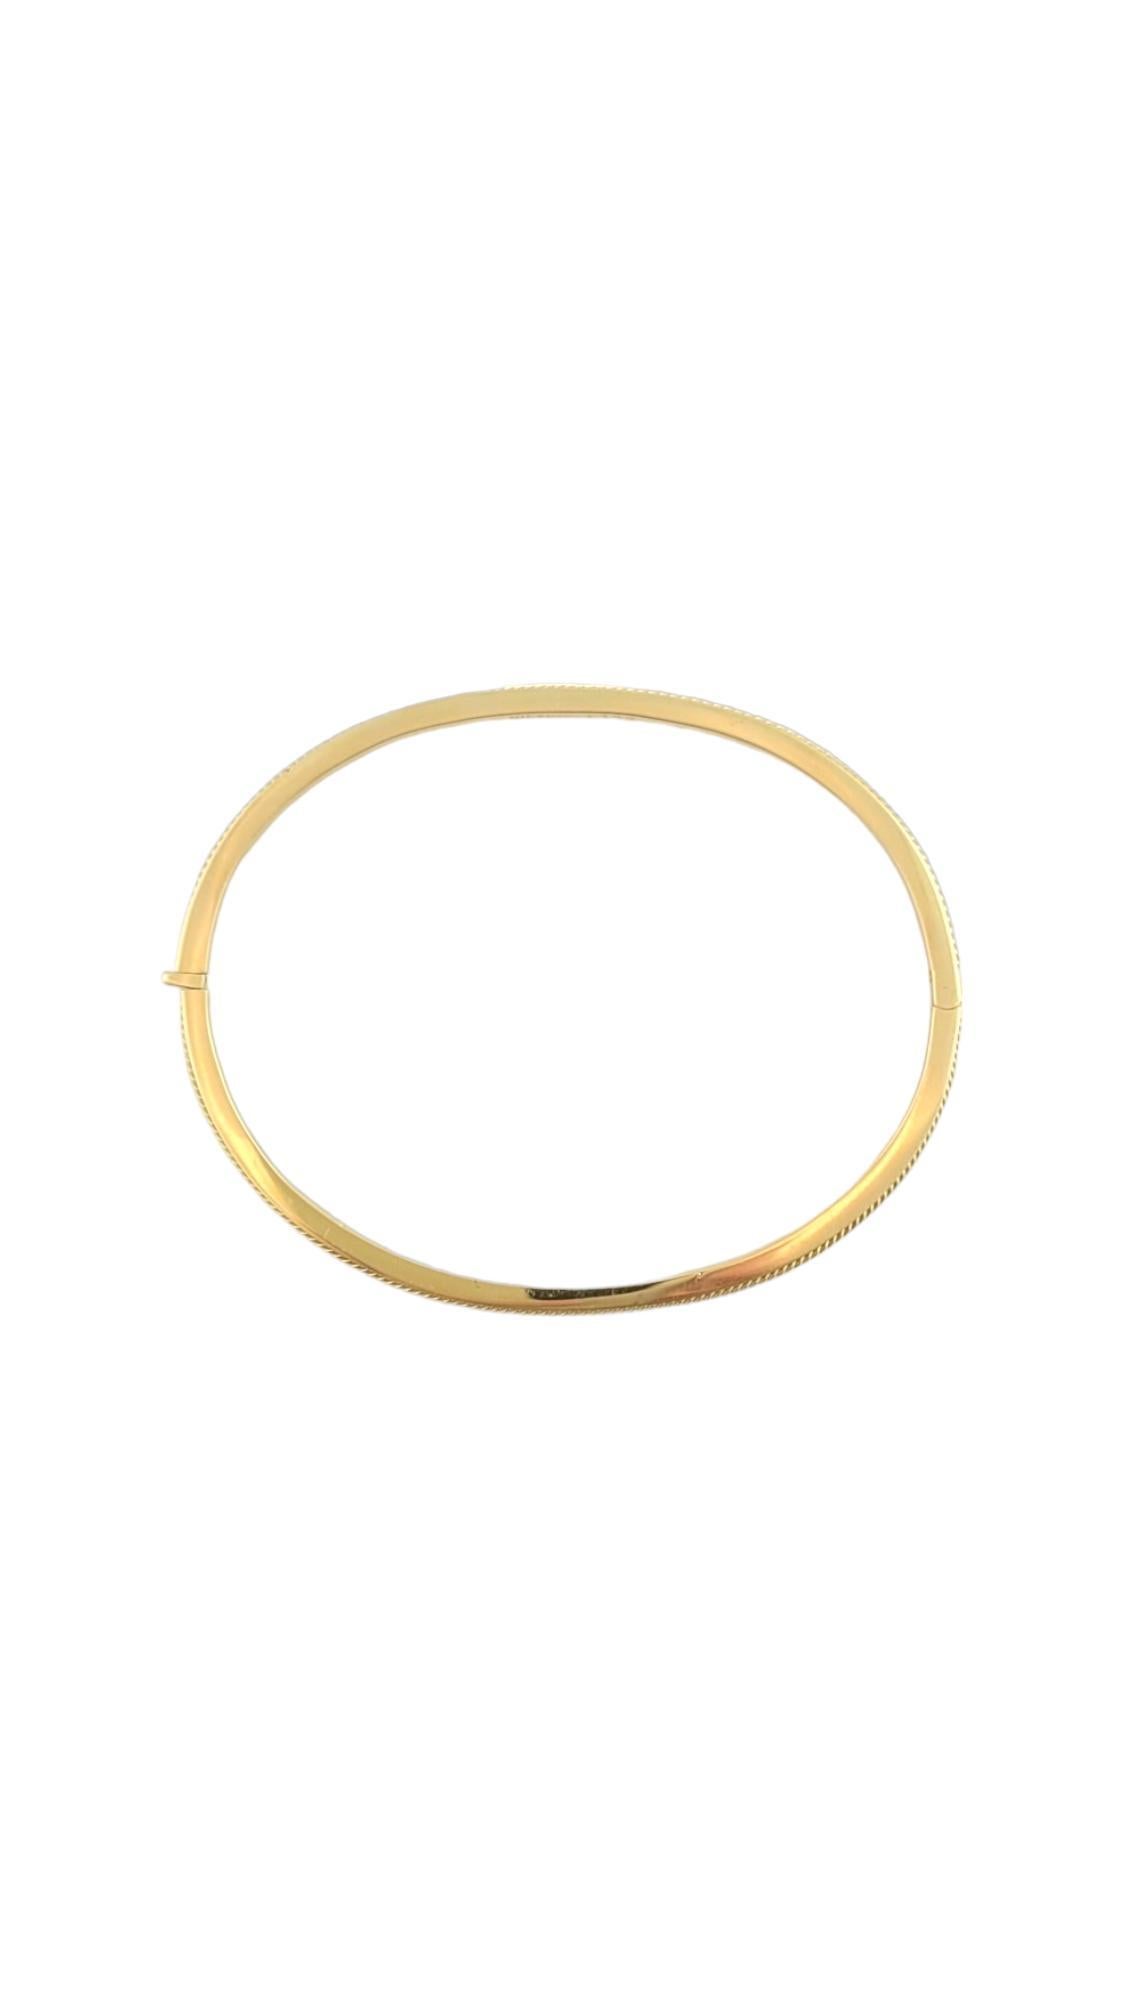 Women's Hidalgo 18K Yellow Gold Oval Rope Accented Bangle Bracelet #16506 For Sale